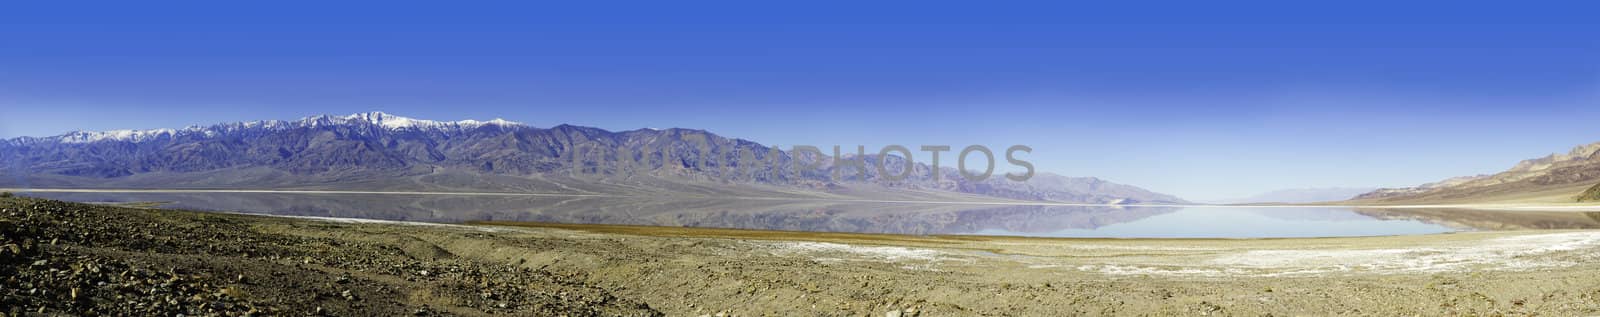 seasonal lake that forms during the winter rains in Death Valley which is surrounded by mountains